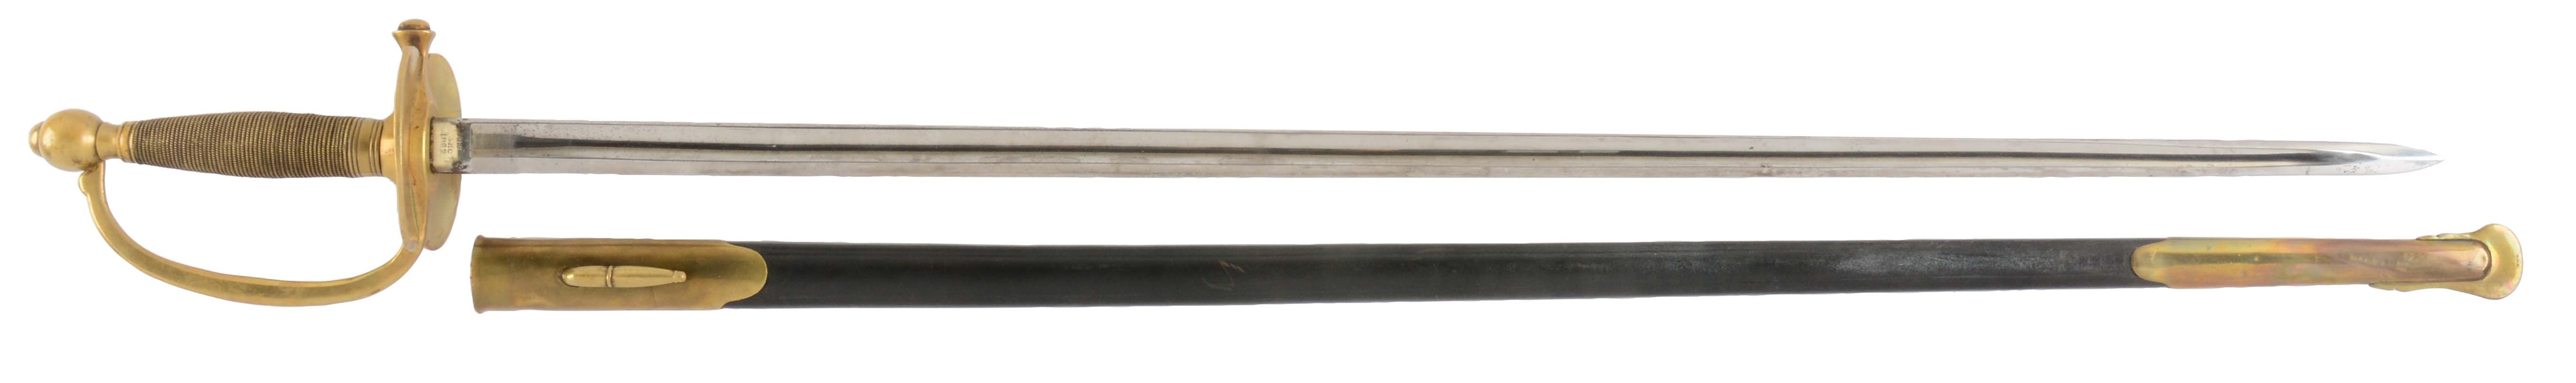 AMES MODEL 1840 NCO SWORD WITH SCABBARD.